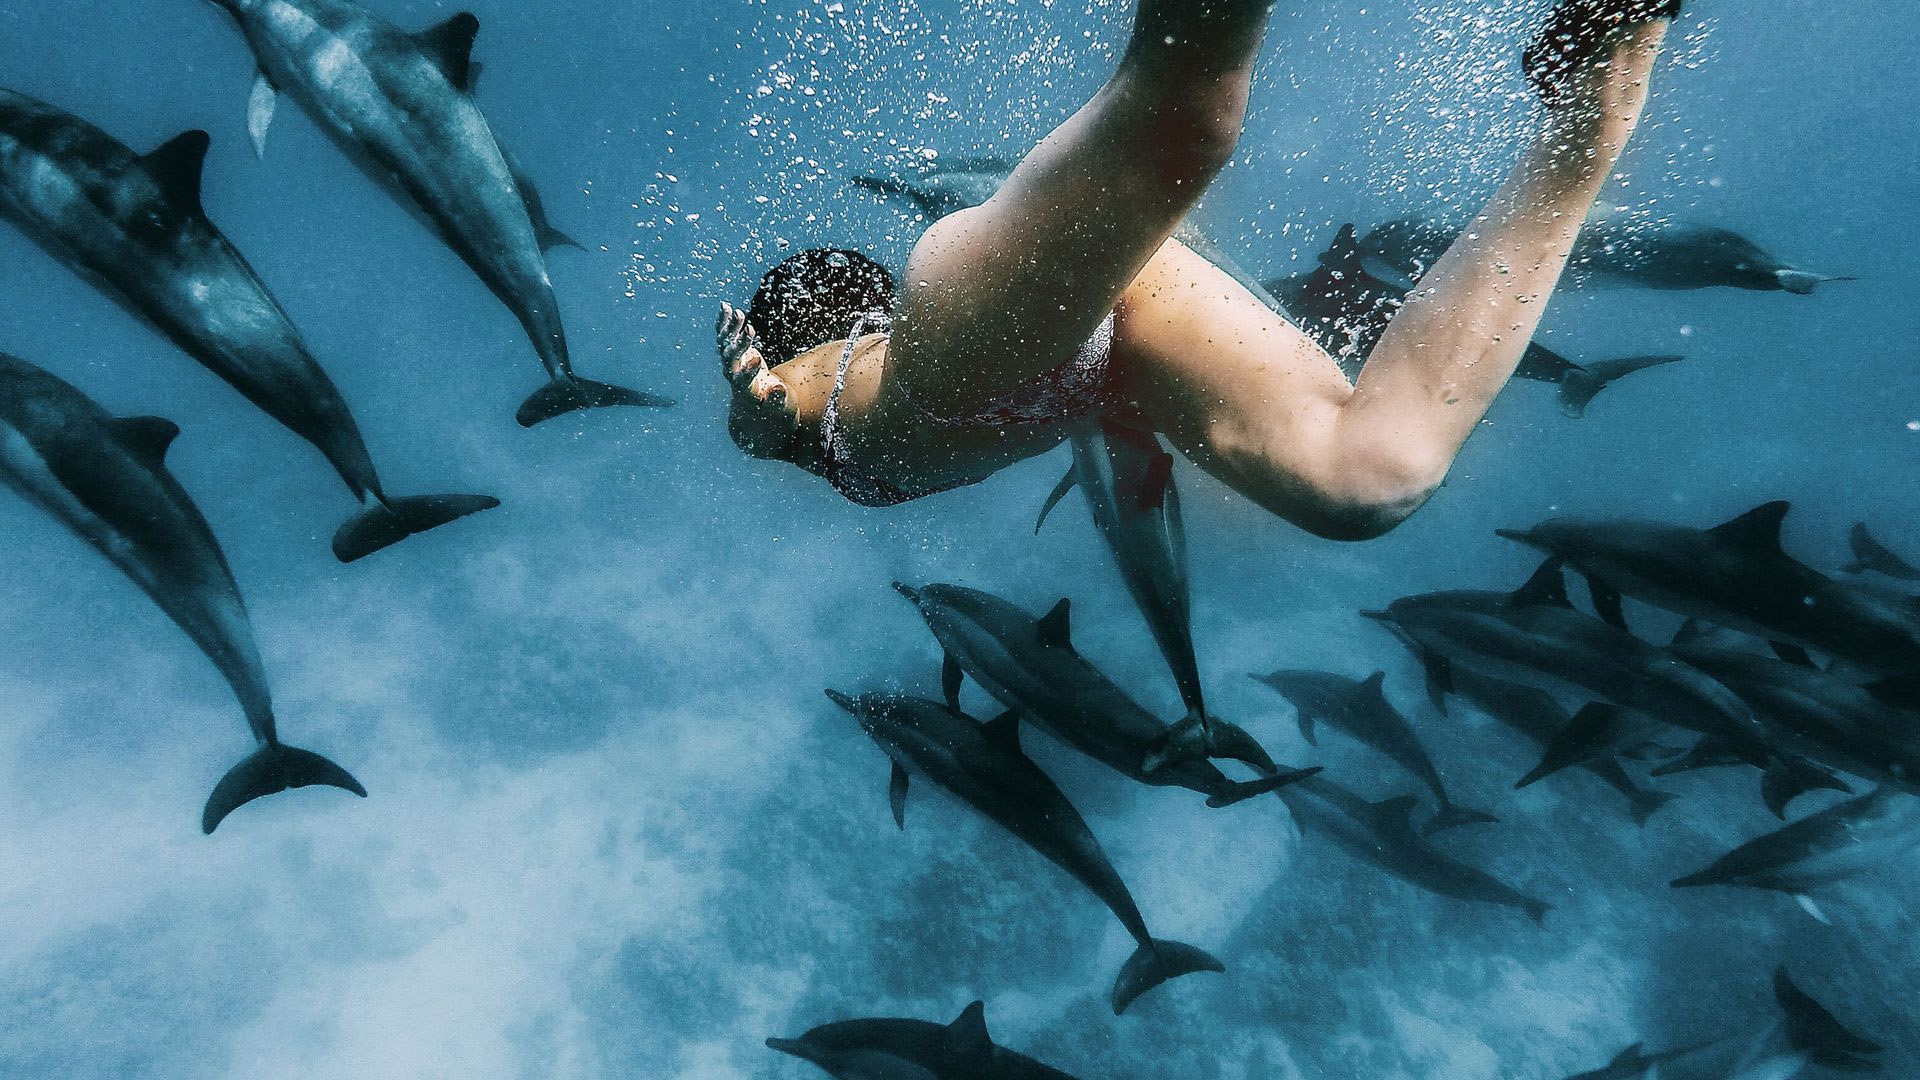 adrian pattinson recommends Swimming Naked With Dolphins